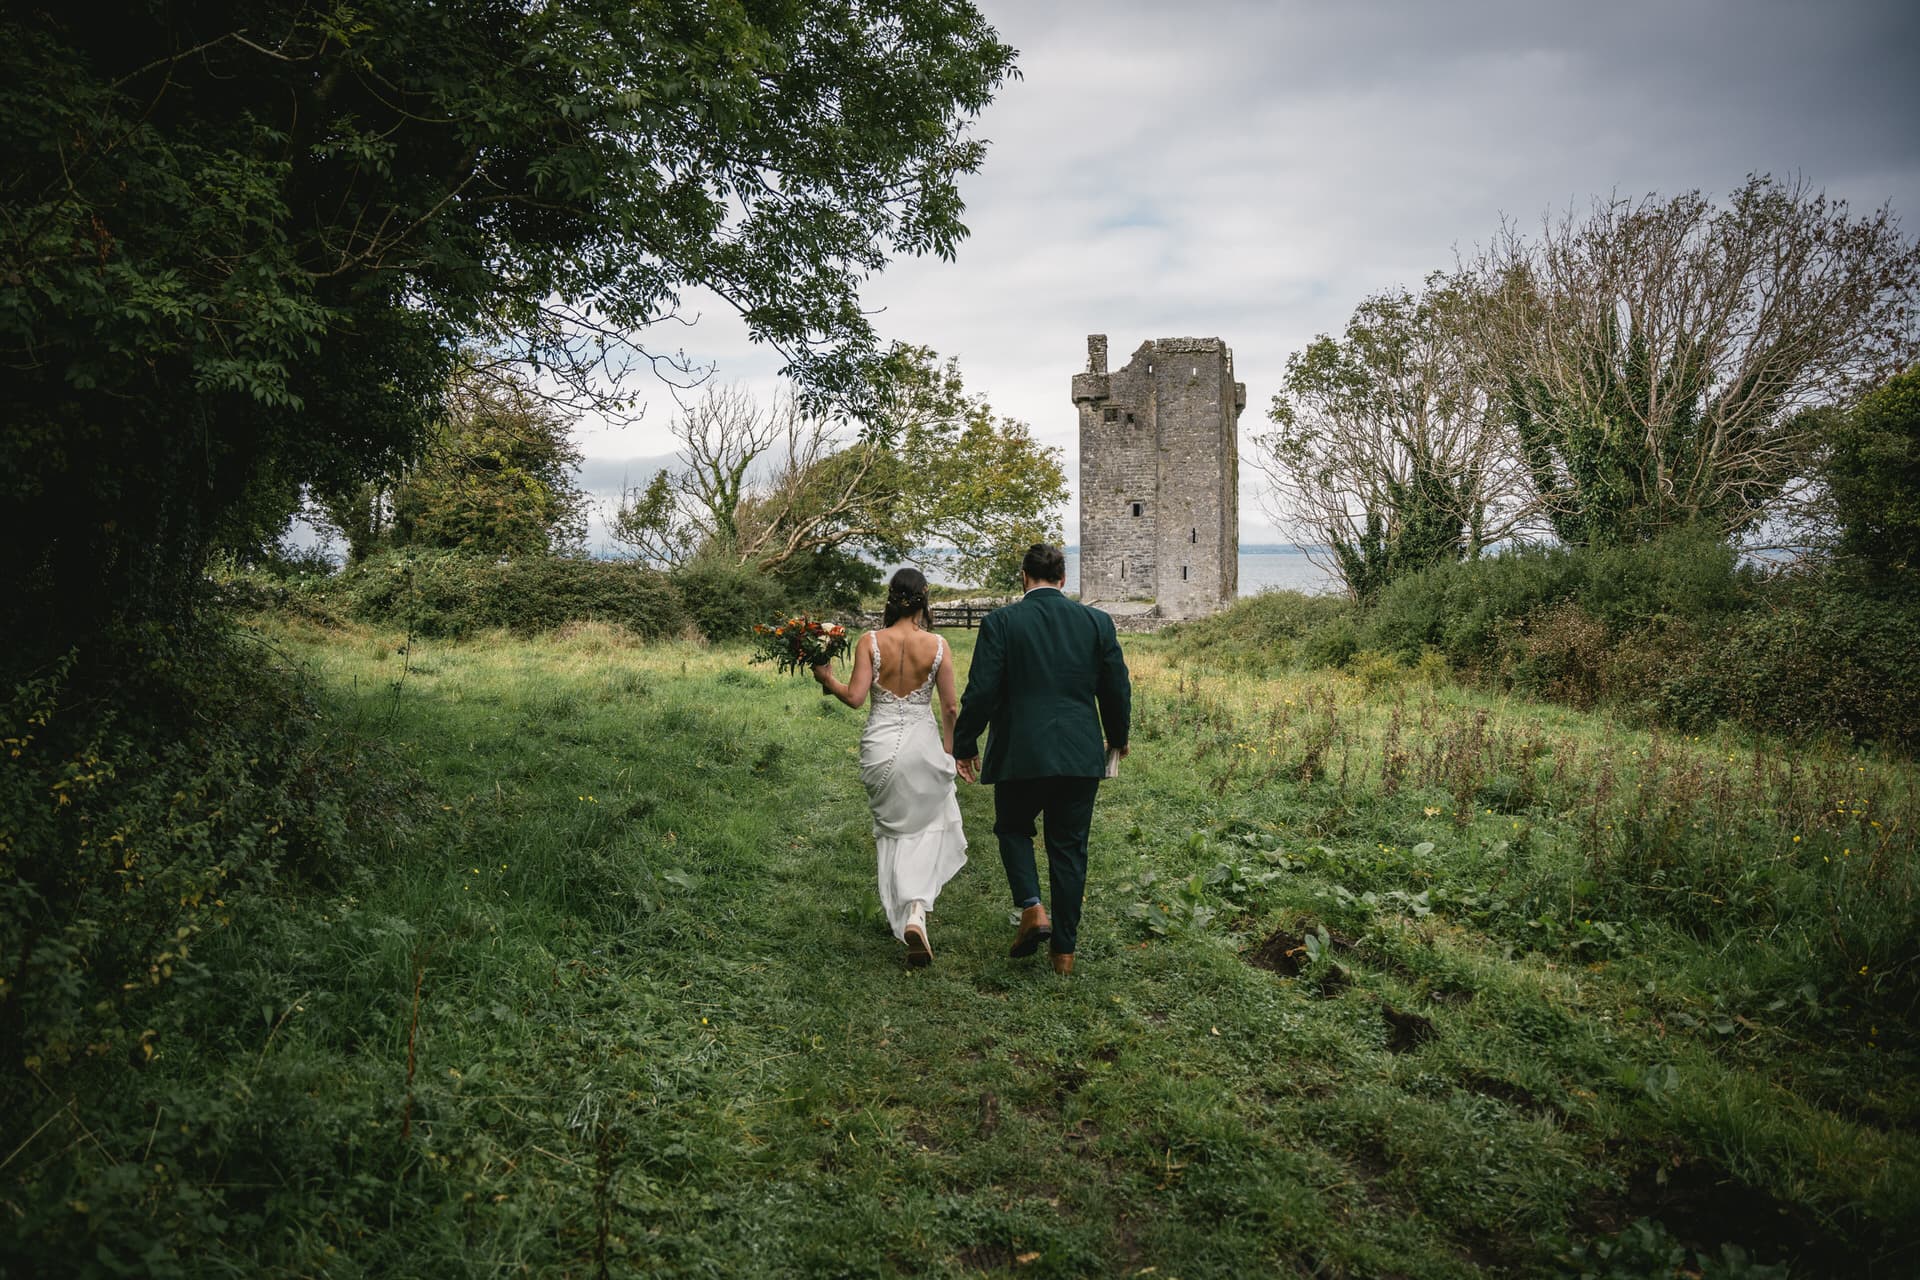 Jesse and Sal's Irish elopement: A day filled with adventure and love.